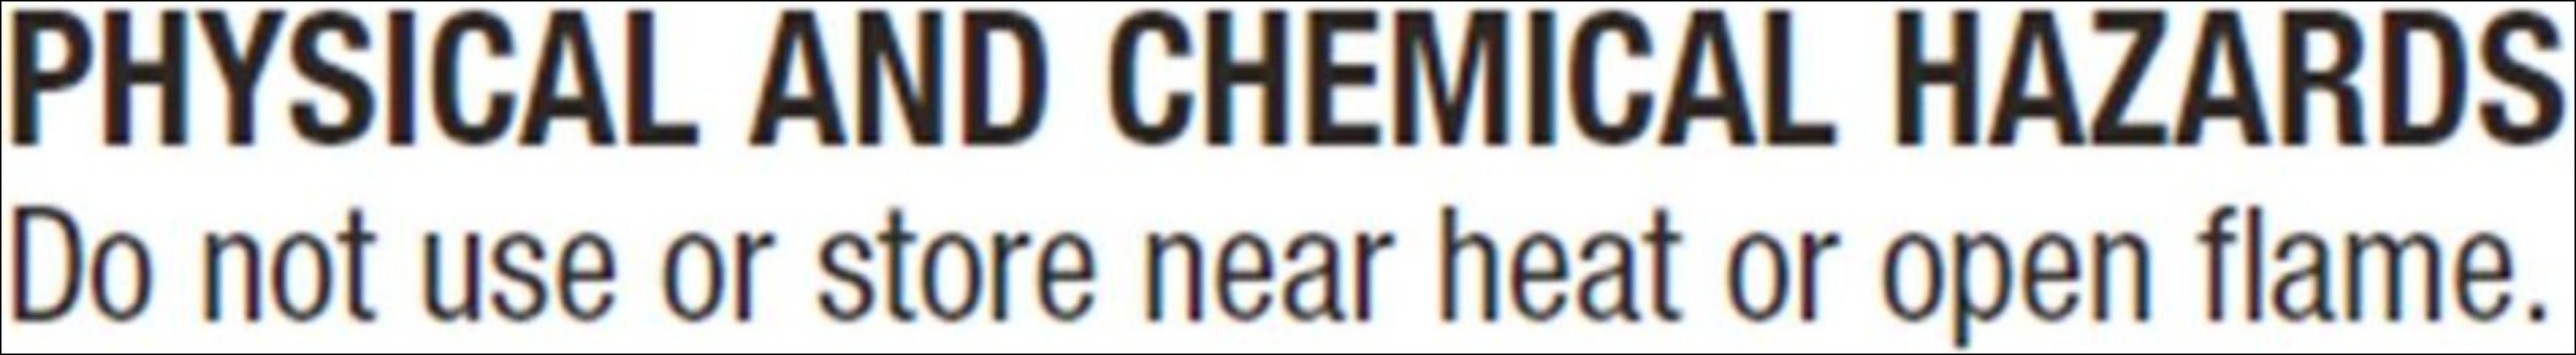 Figure 1. A typical statement of physical and chemical hazards from the label of a flammable pesticide.